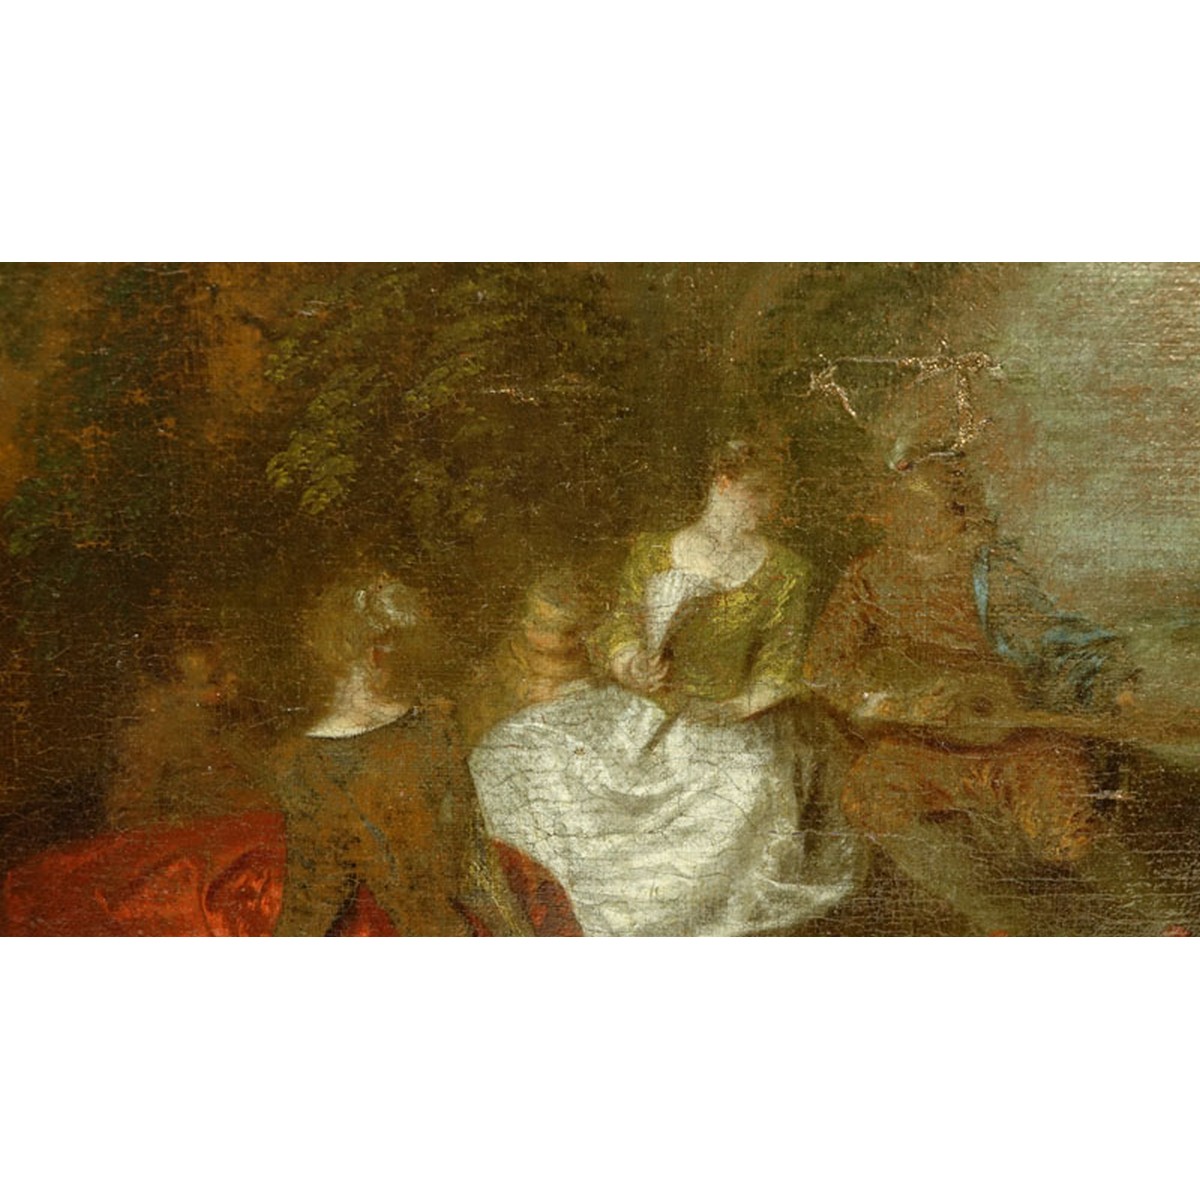 Attributed to: Antoine Watteau, French (1684 - 1721) Oil on Relined Canvas Conserved on Wood Panel "Fete Champetre", Artist name and date inscribed on plaque affixed to frame. Label attached en verso, inscribed "Watteau" on obverse side of the canvas.